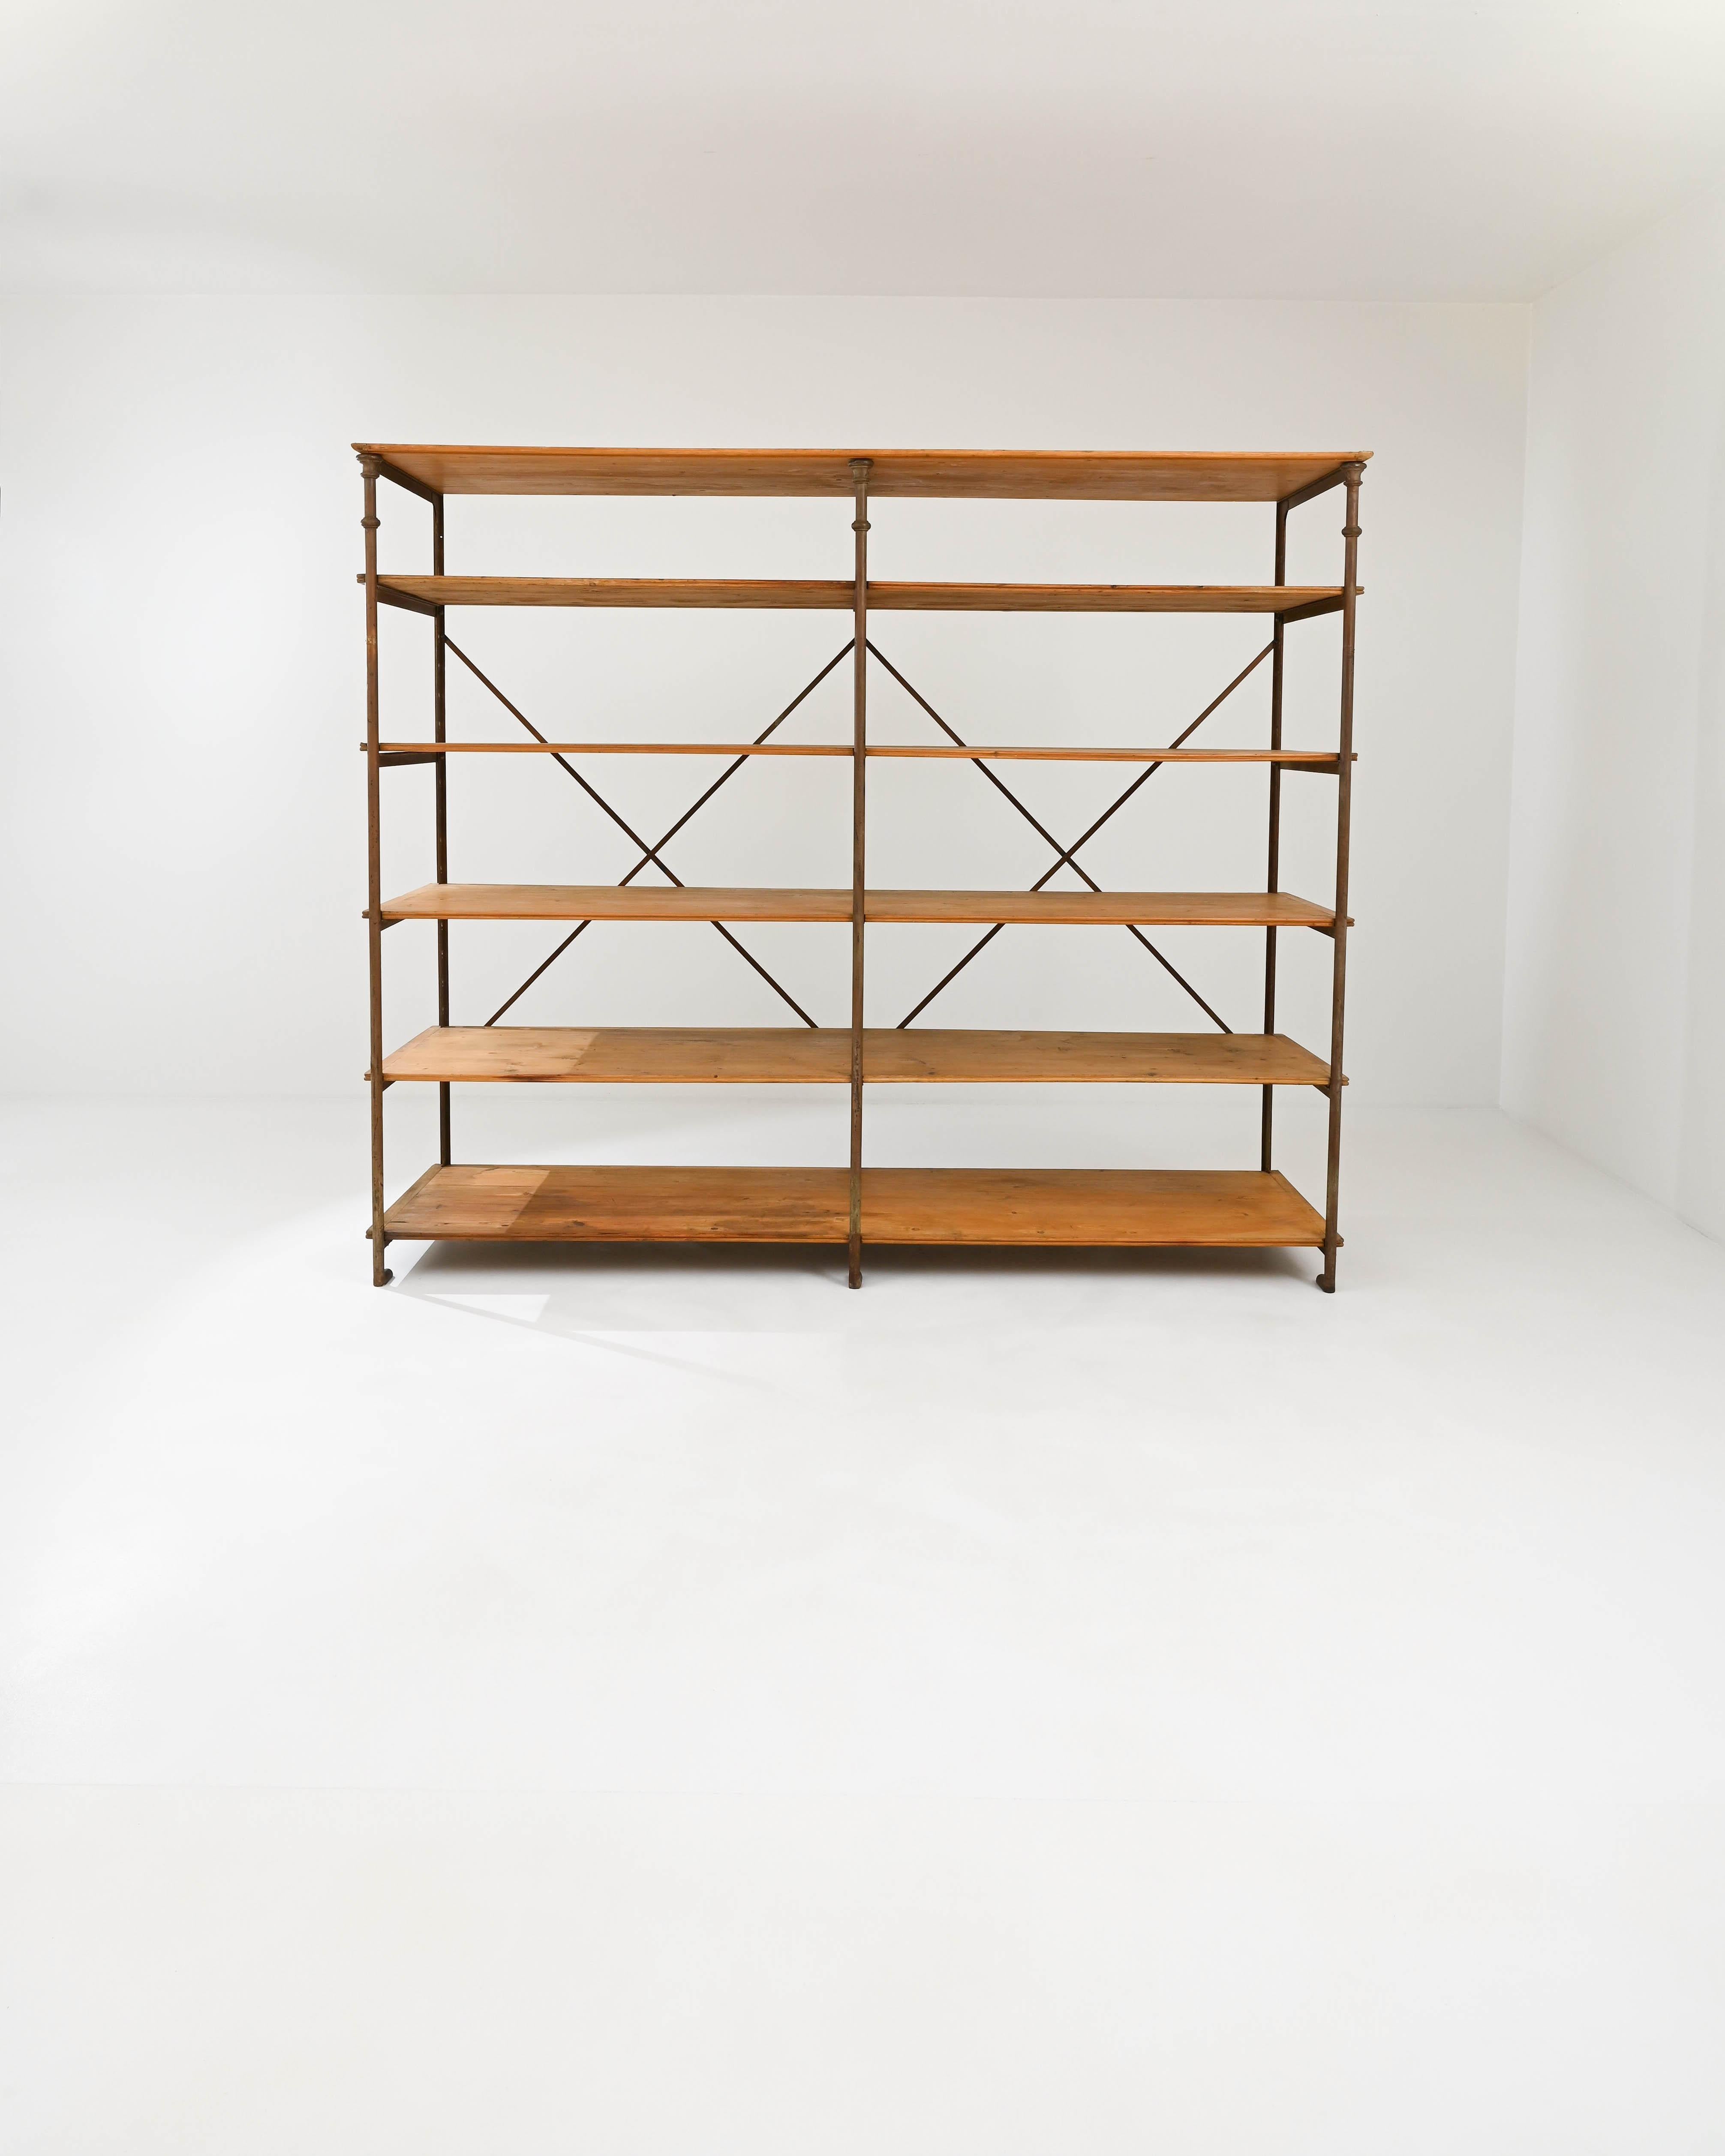 Combining rationality and grace, this vintage shelving unit is a classic of Industrial design. Built in Paris at the turn of the century by Theodore Scherf — an embossed plaque on the frame attests to the piece’s authenticity — the grid-like form is